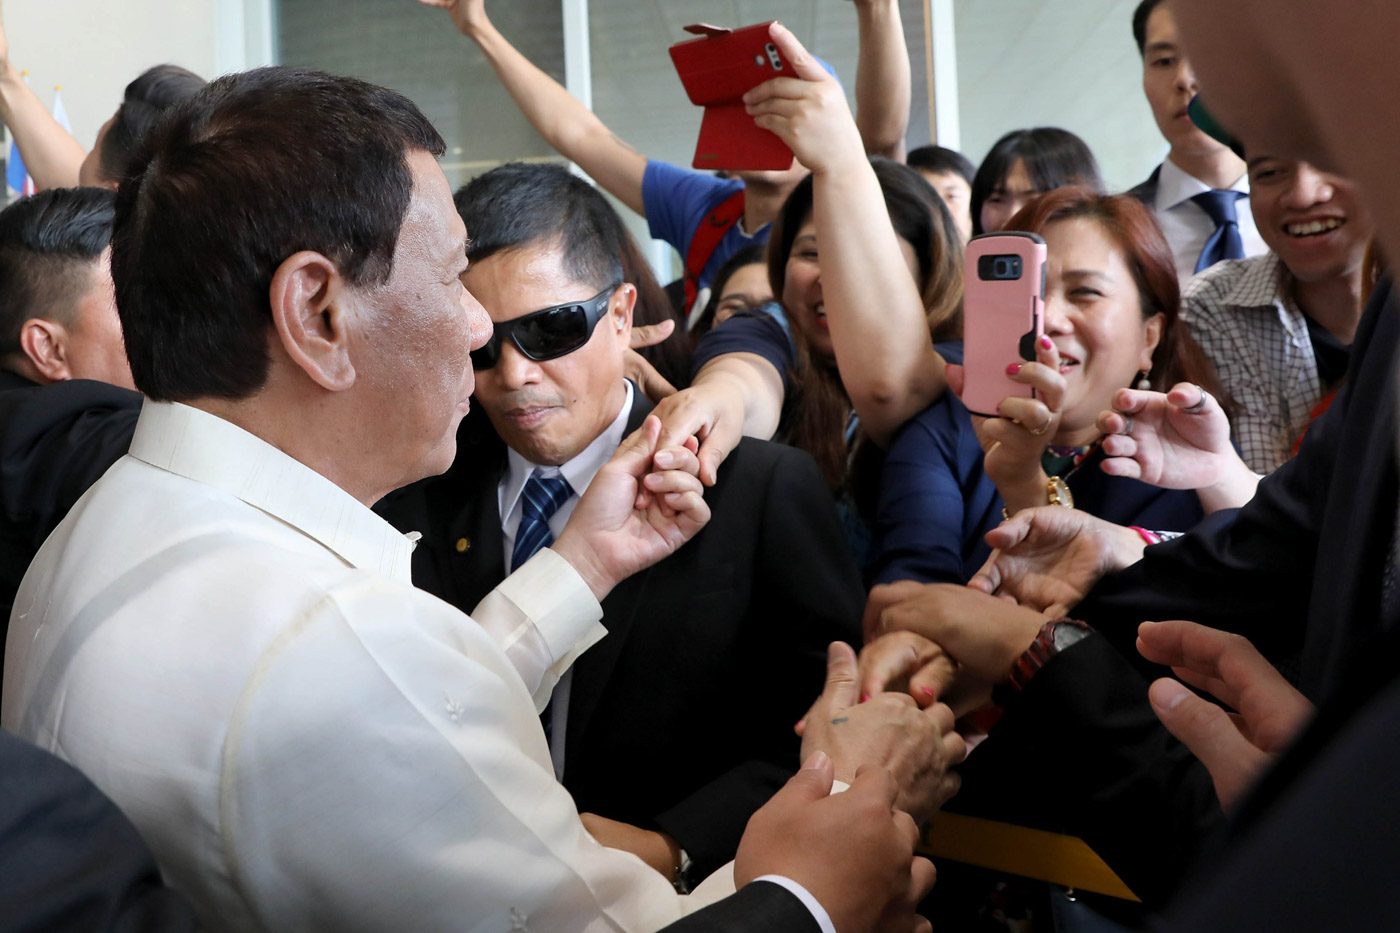 ‘Sickening’: Lawmakers react to Duterte kissing an OFW on the lips